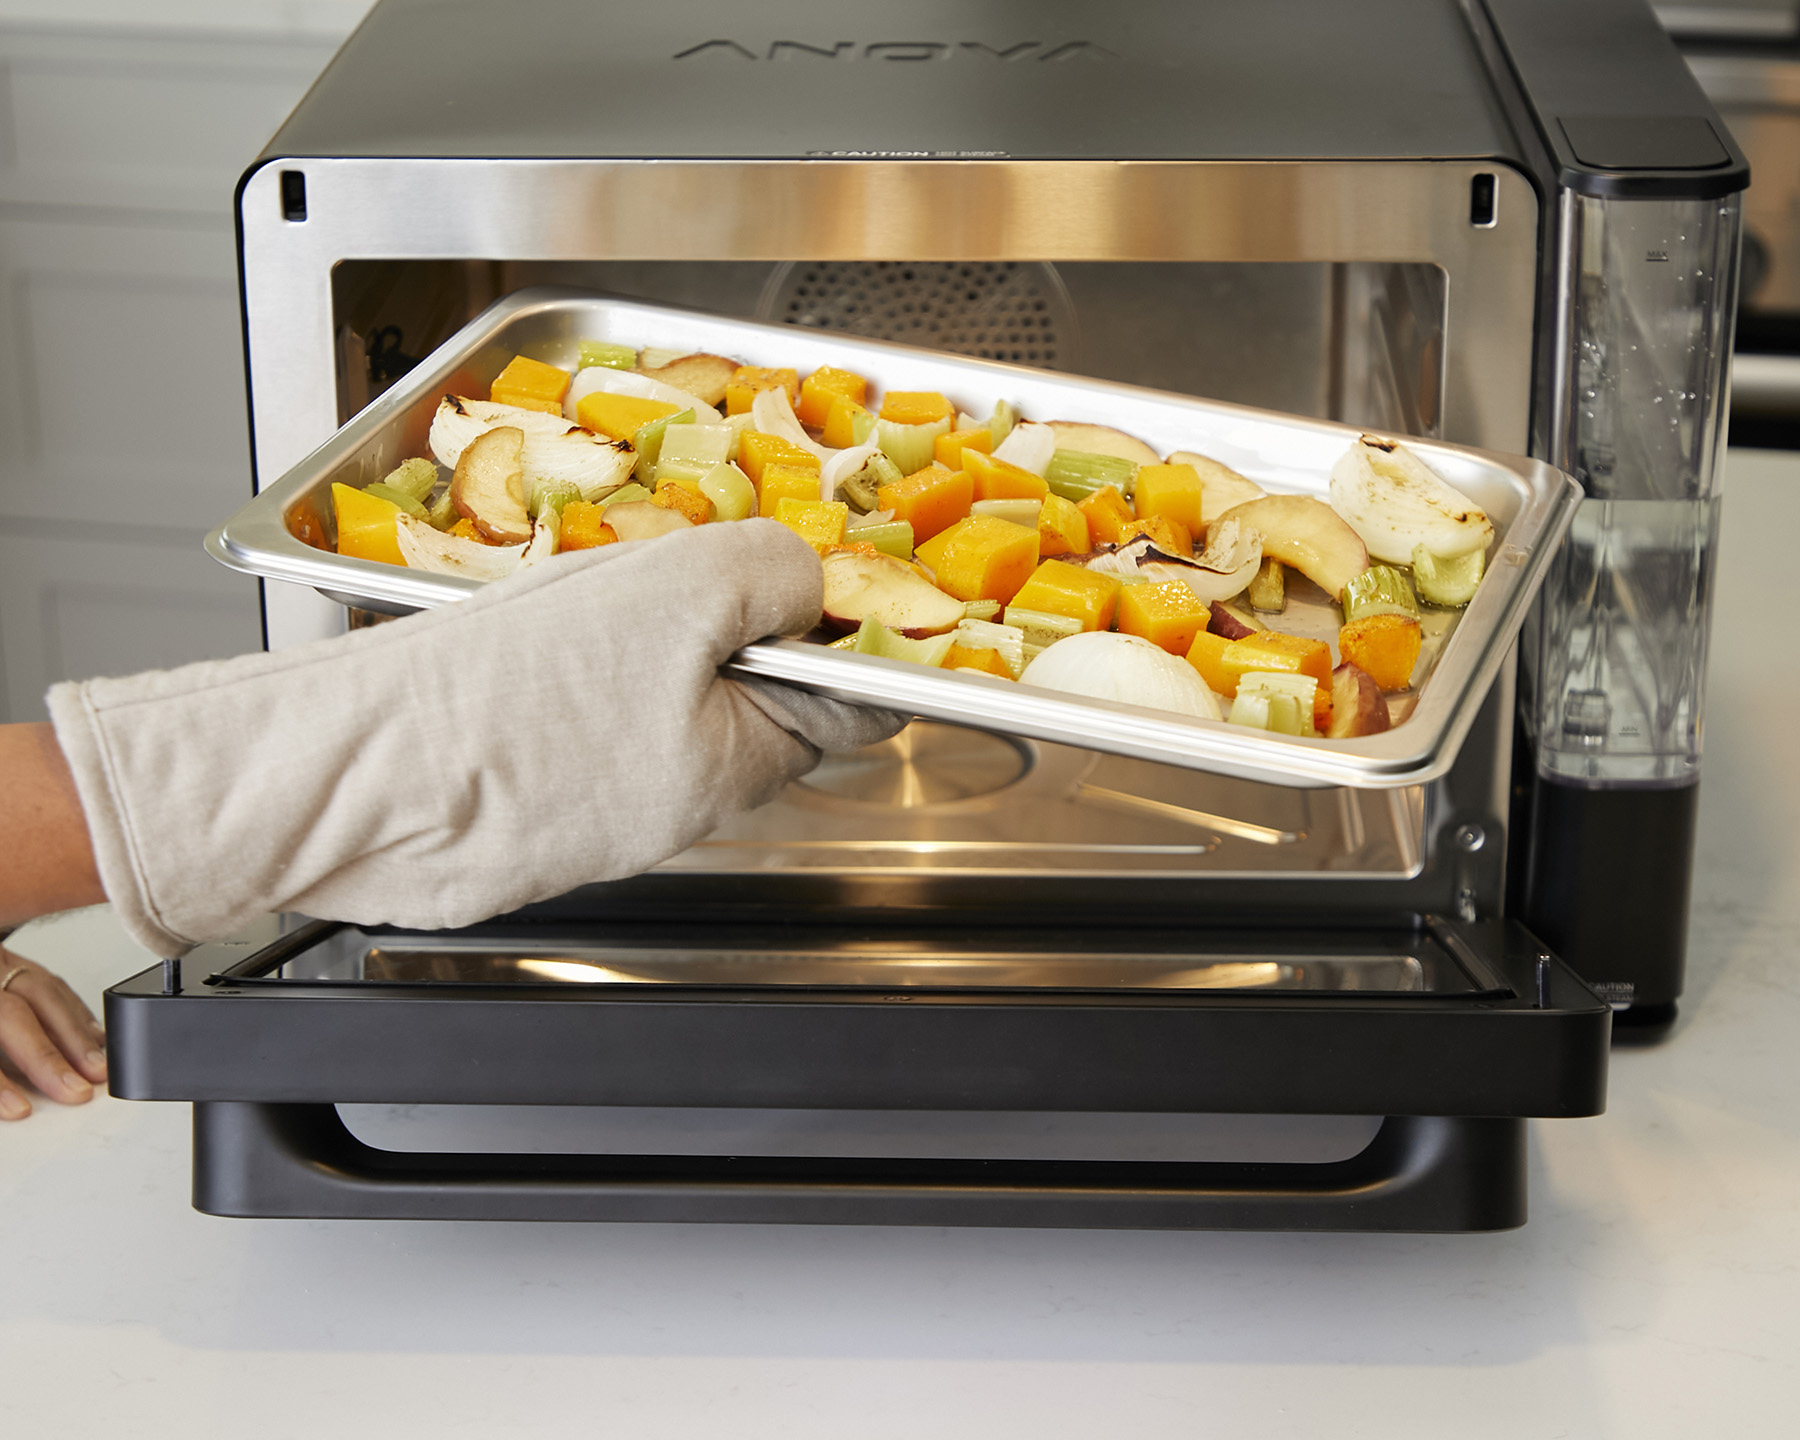 Anova Culinary Precision Oven Product Photography by Sean D. Johnson